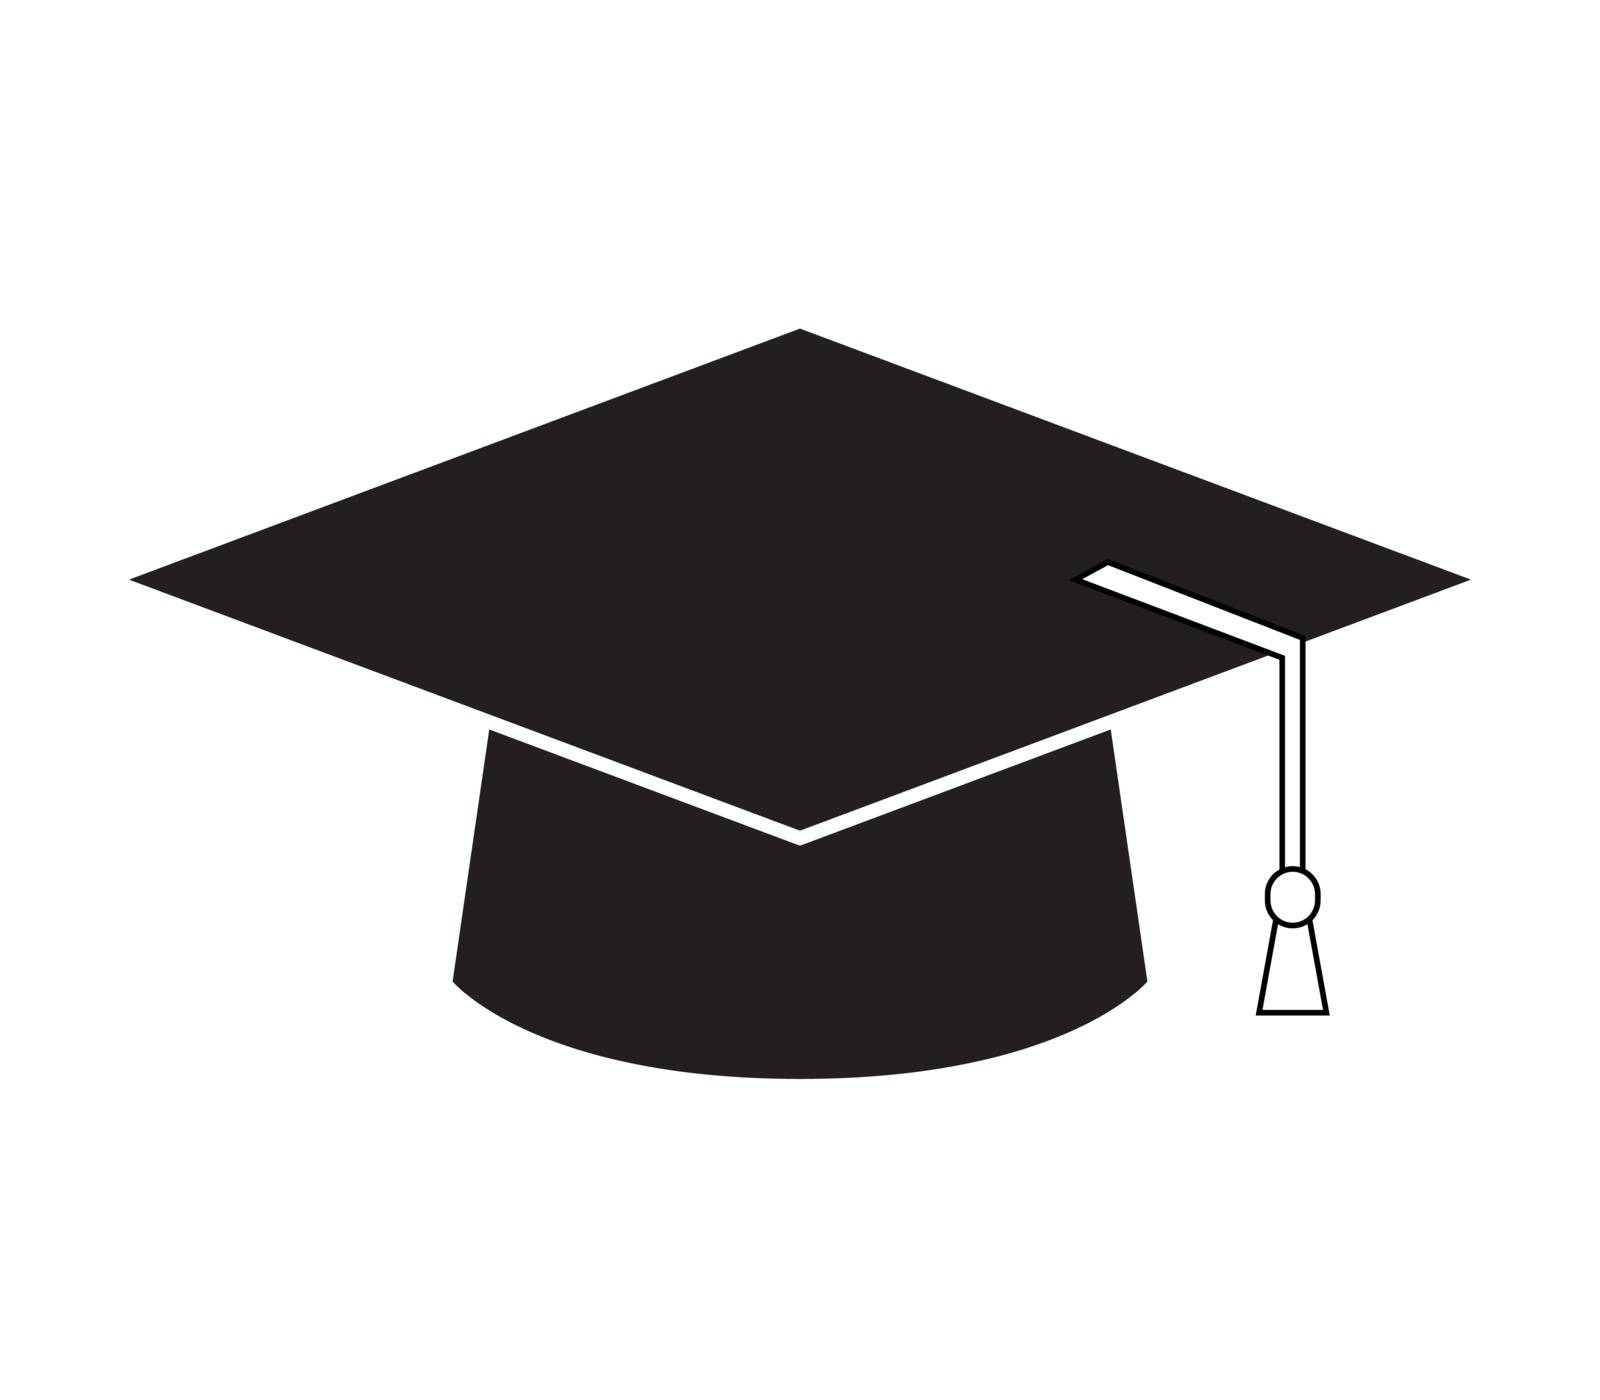 graduation hat icon by Mark1987